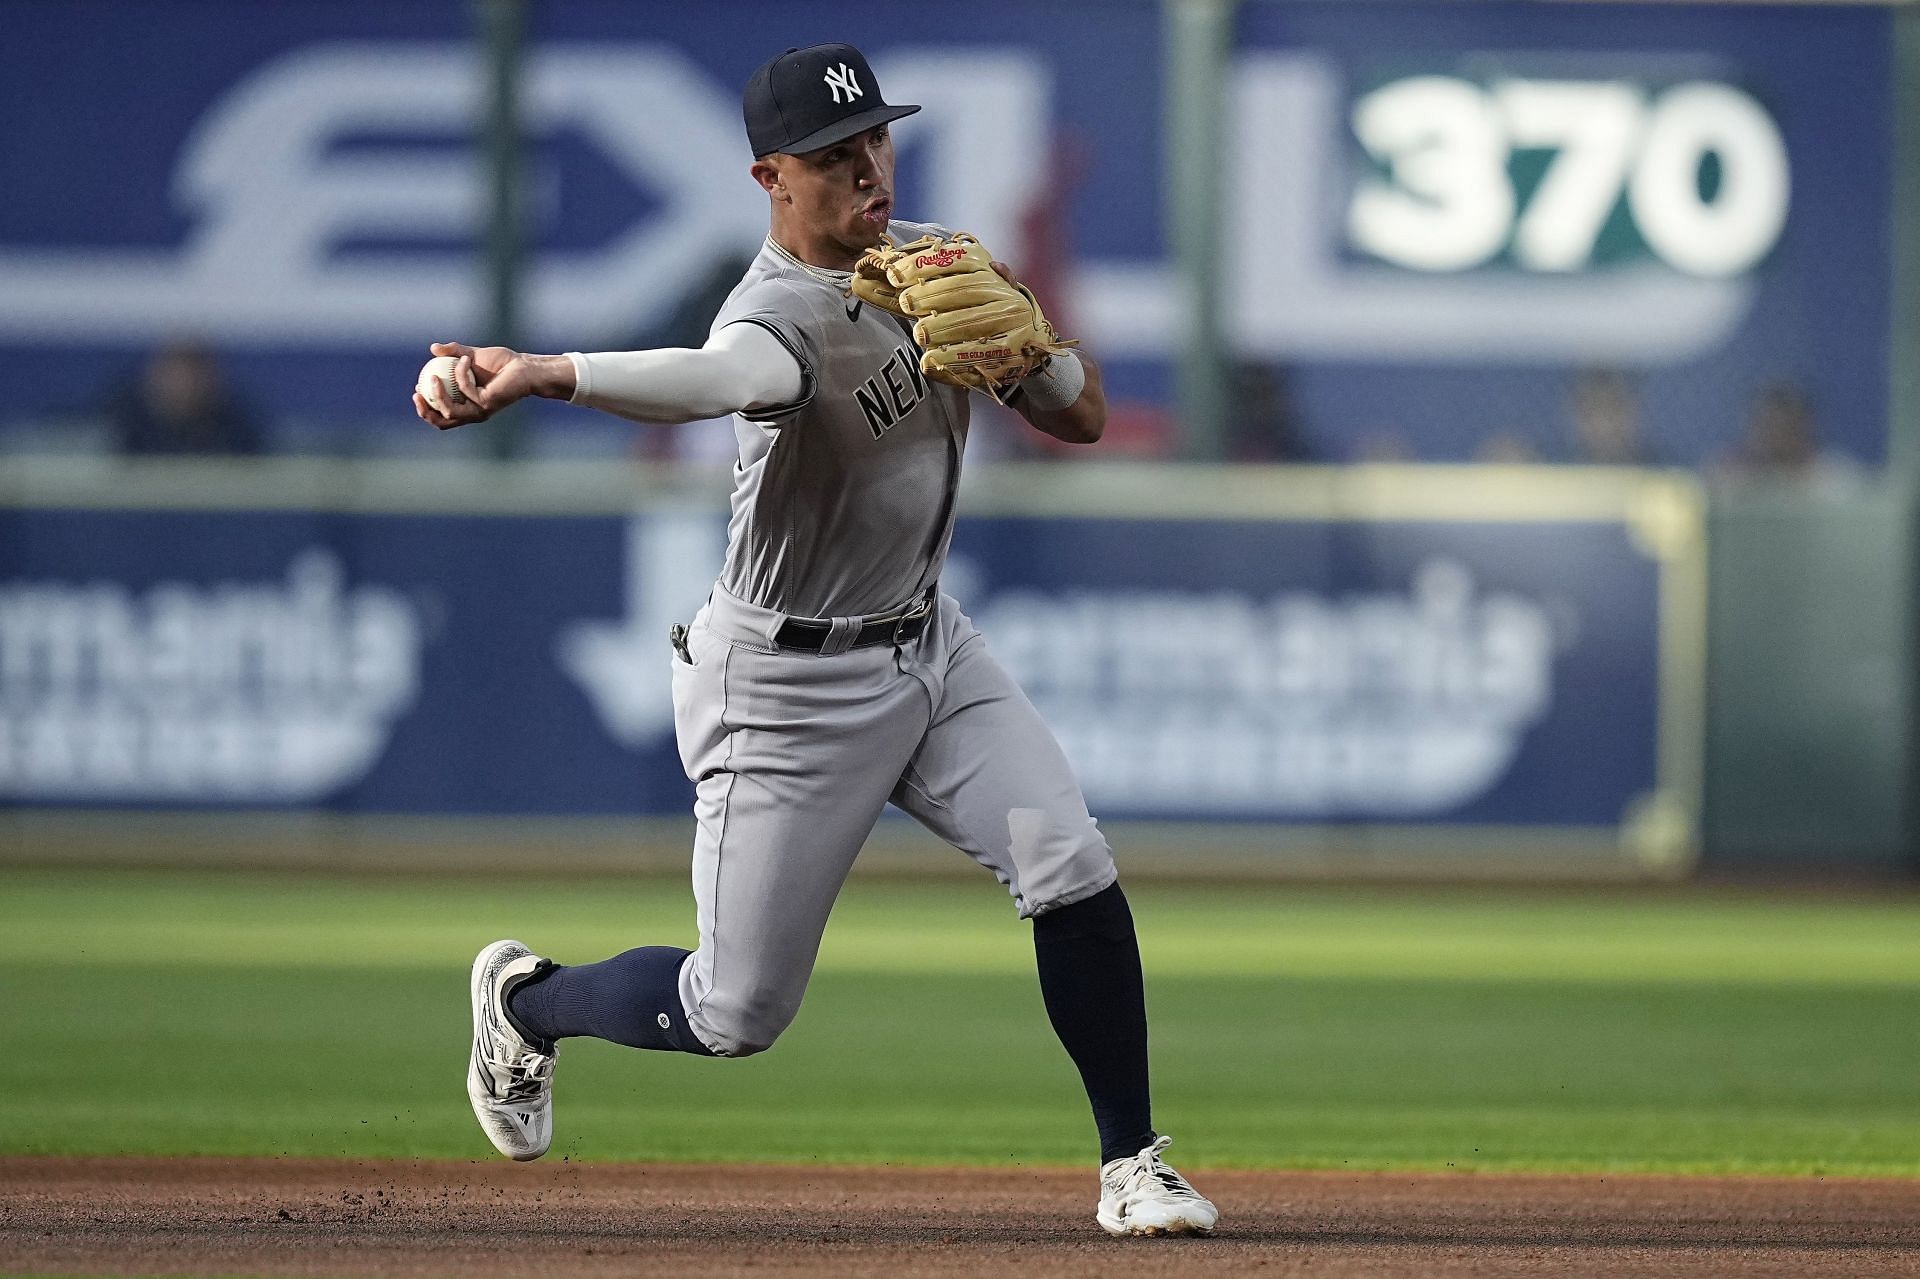 What's next for Yankees' prospect Oswald Peraza?